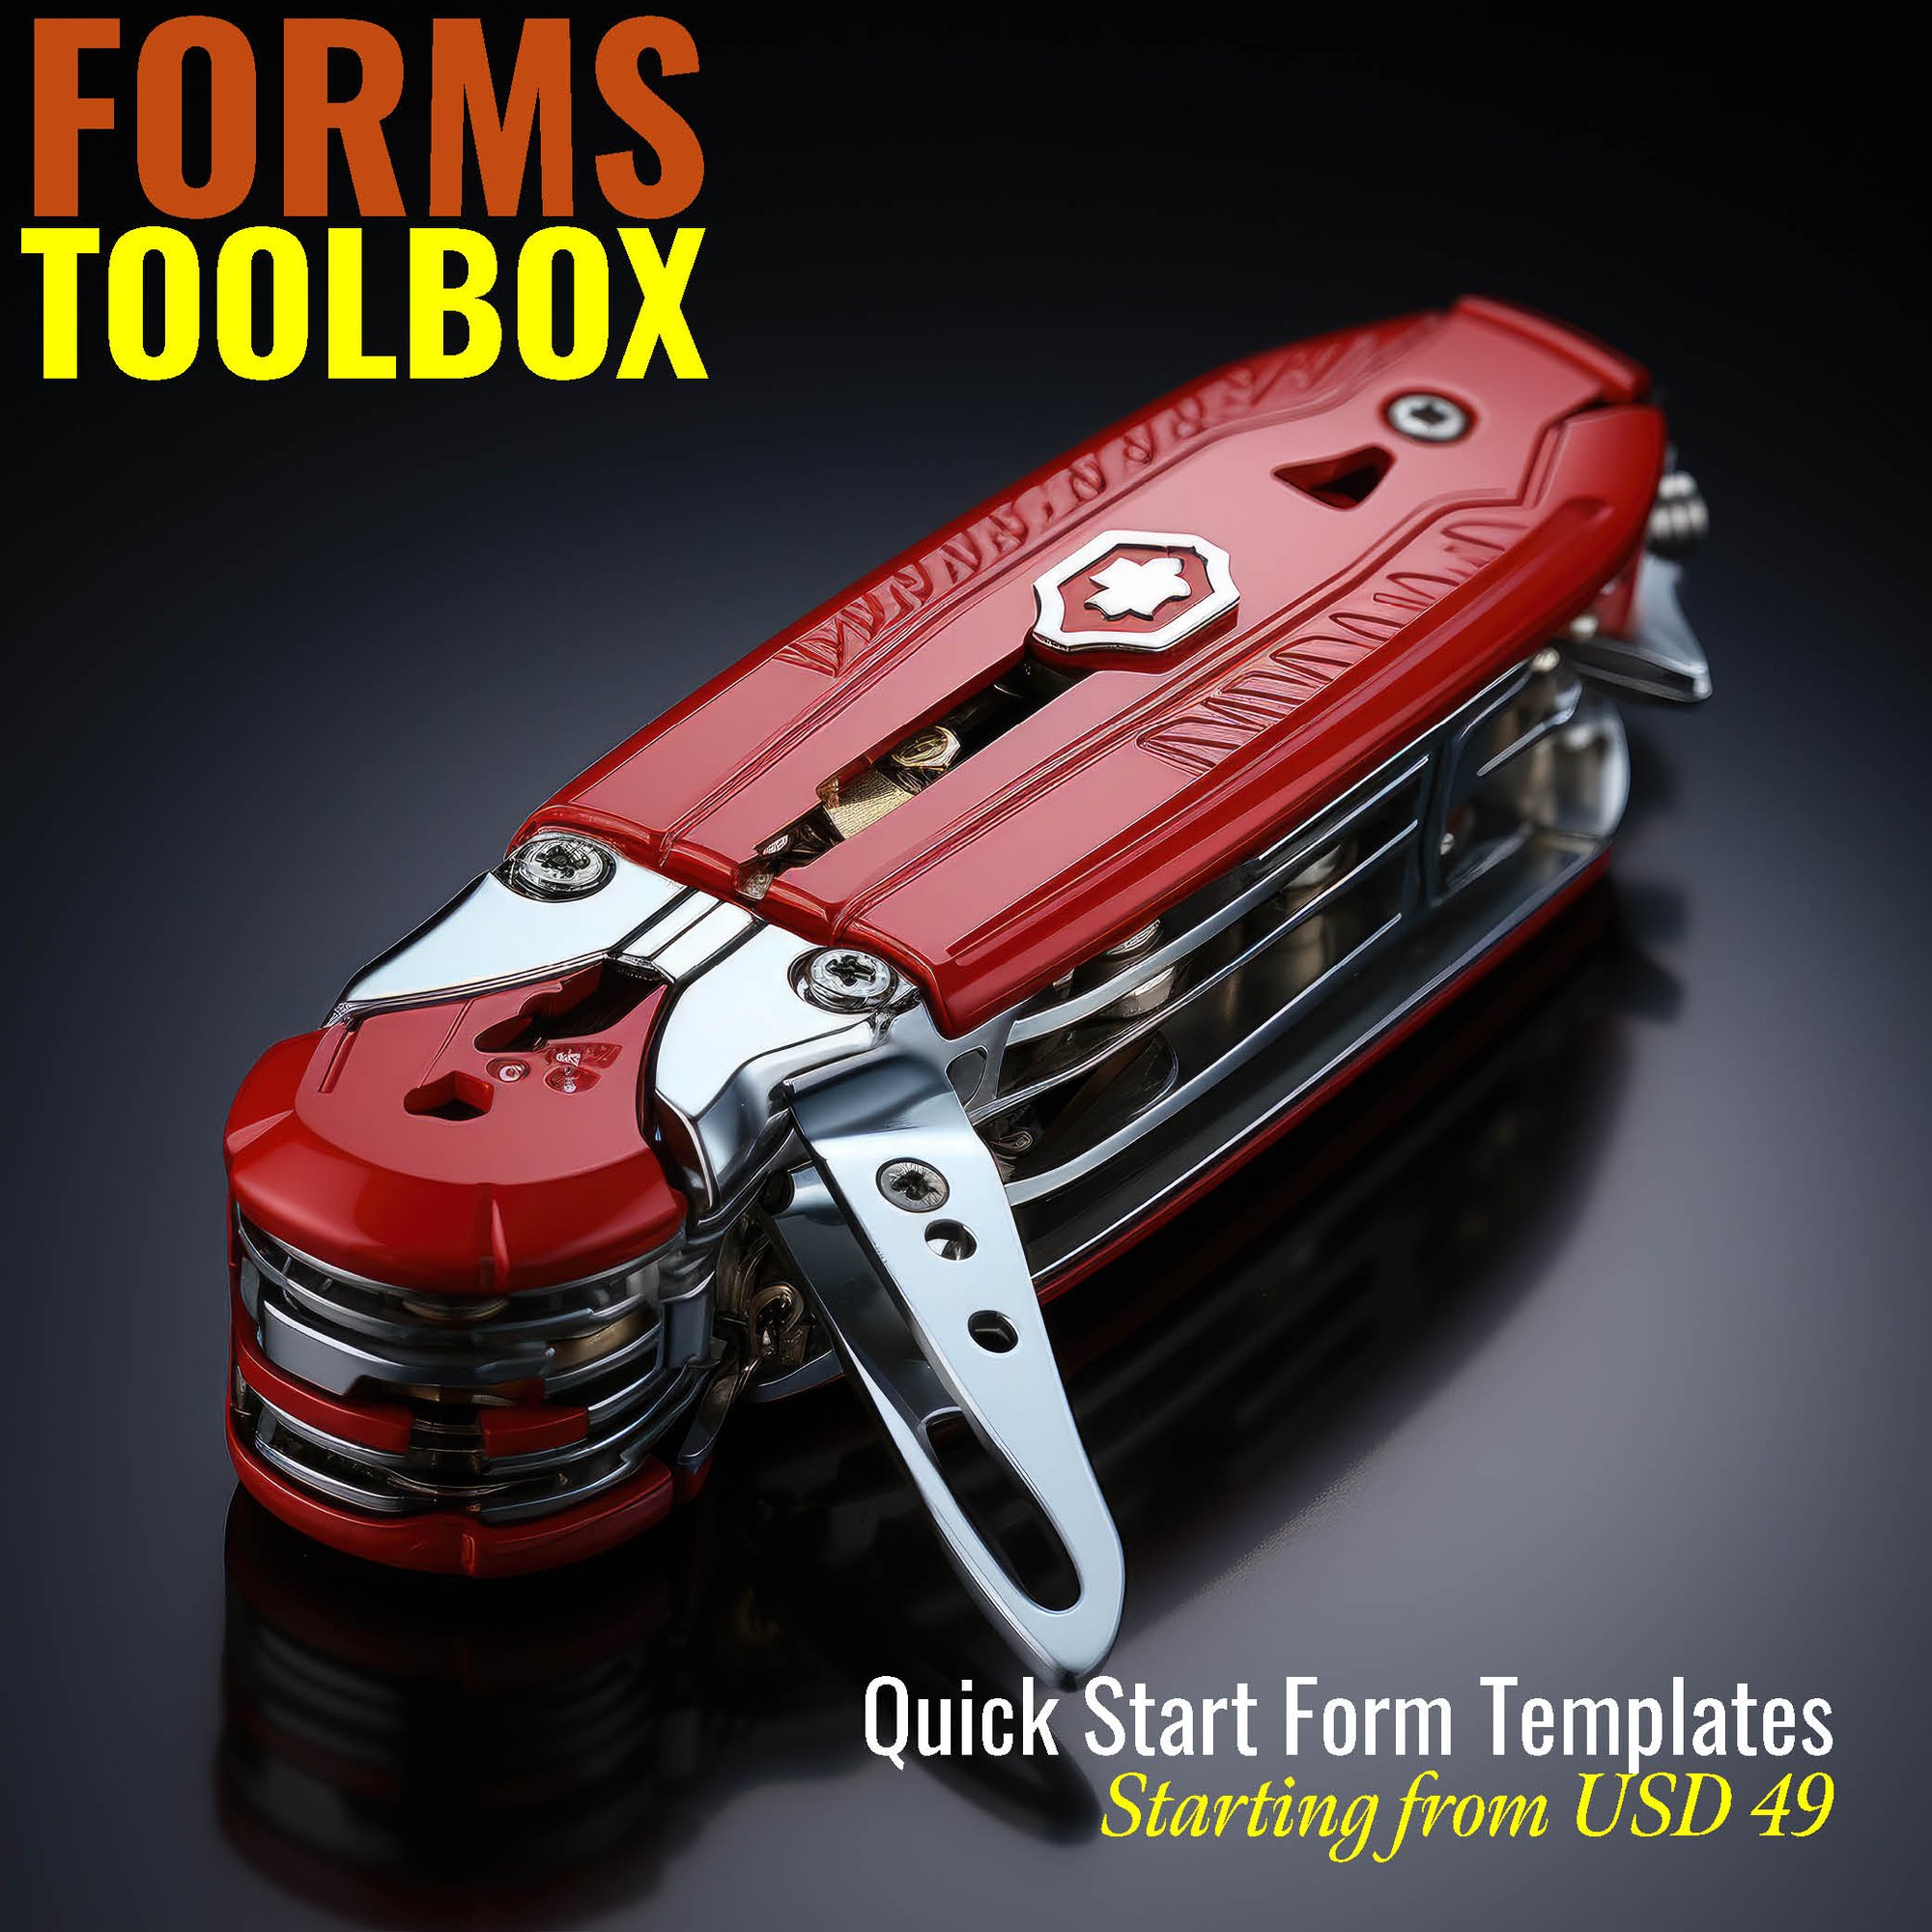 Forms ToolBox Side Image copy